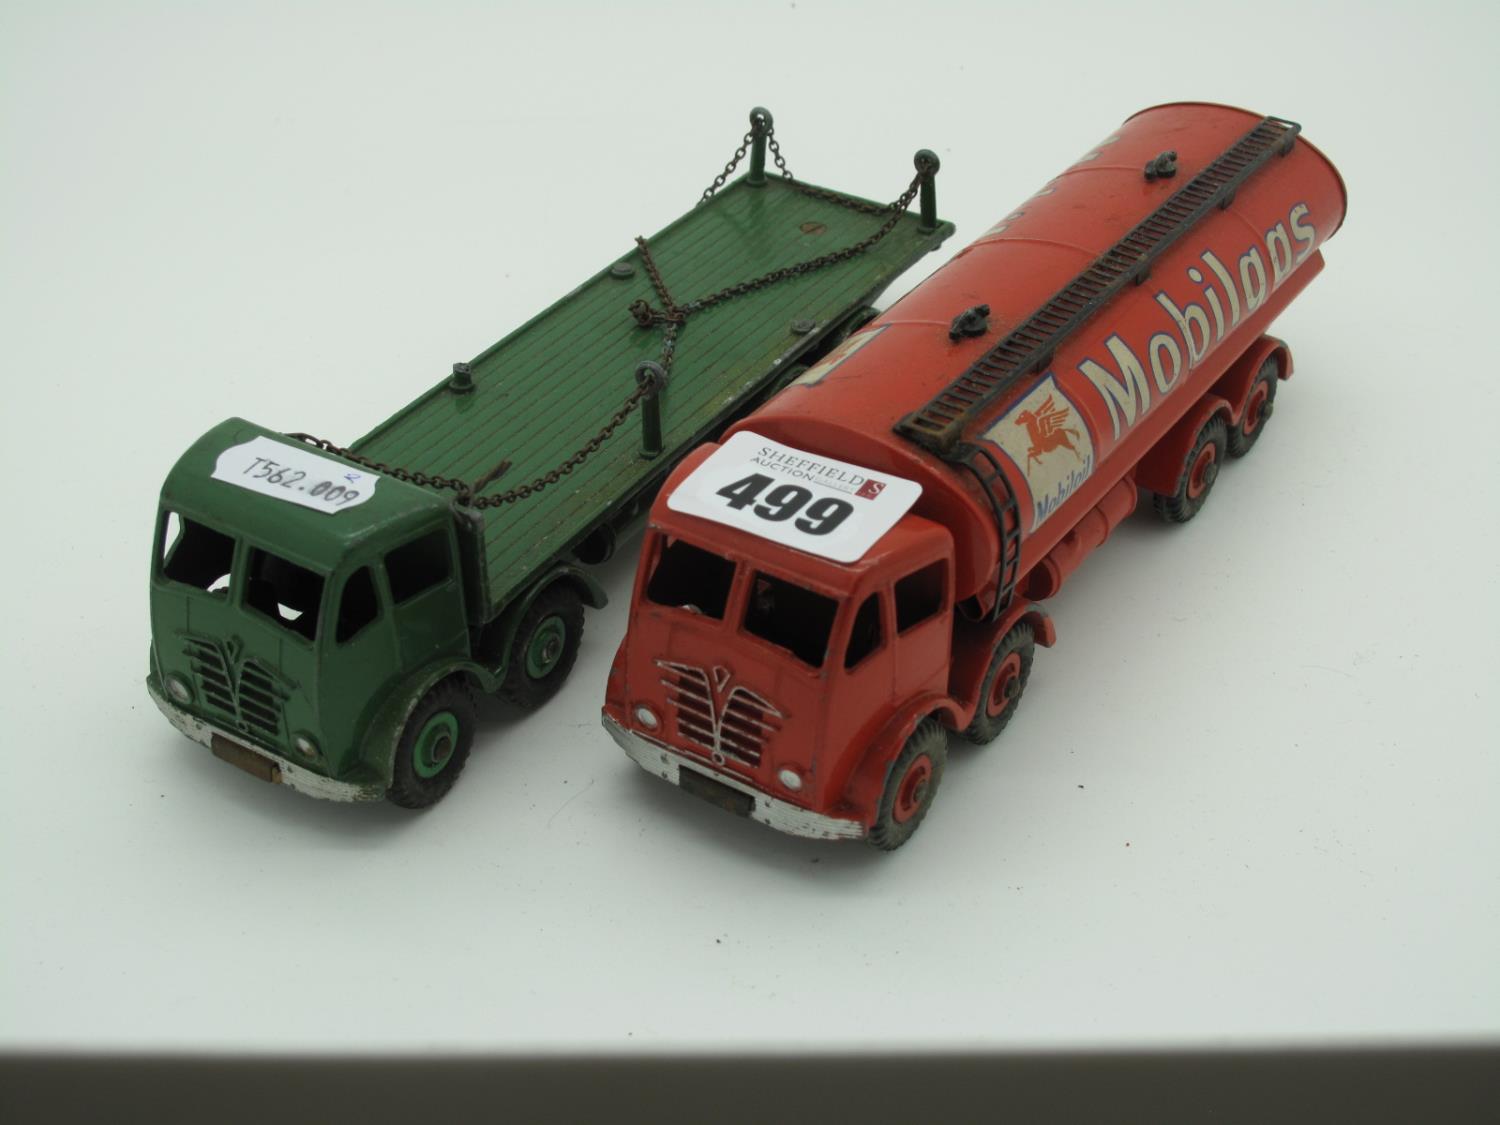 Two Original Dinky 2nd Type Fodens No 941 - Mobilgas and No 905 - Flat Truck with Chains, two